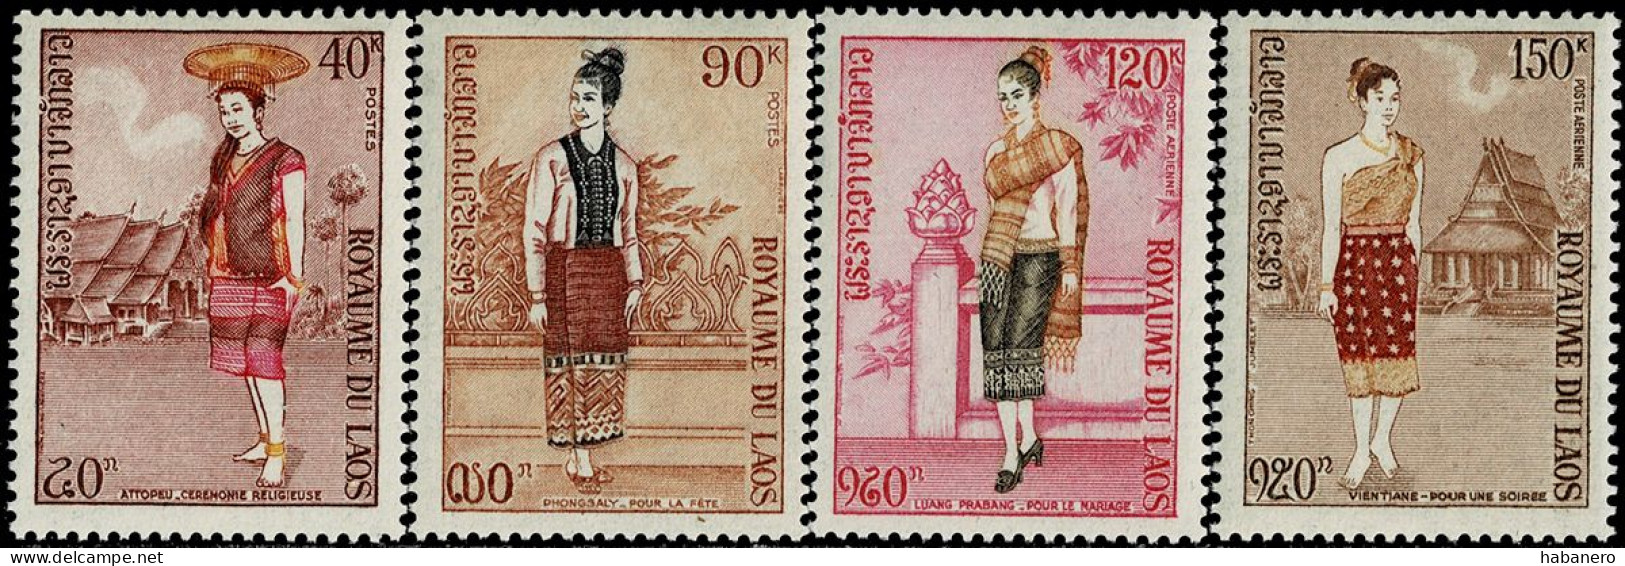 LAOS 1973 Mi 354-357 ETHNIC PEOPLE AND COSTUMES MINT STAMPS ** - Laos